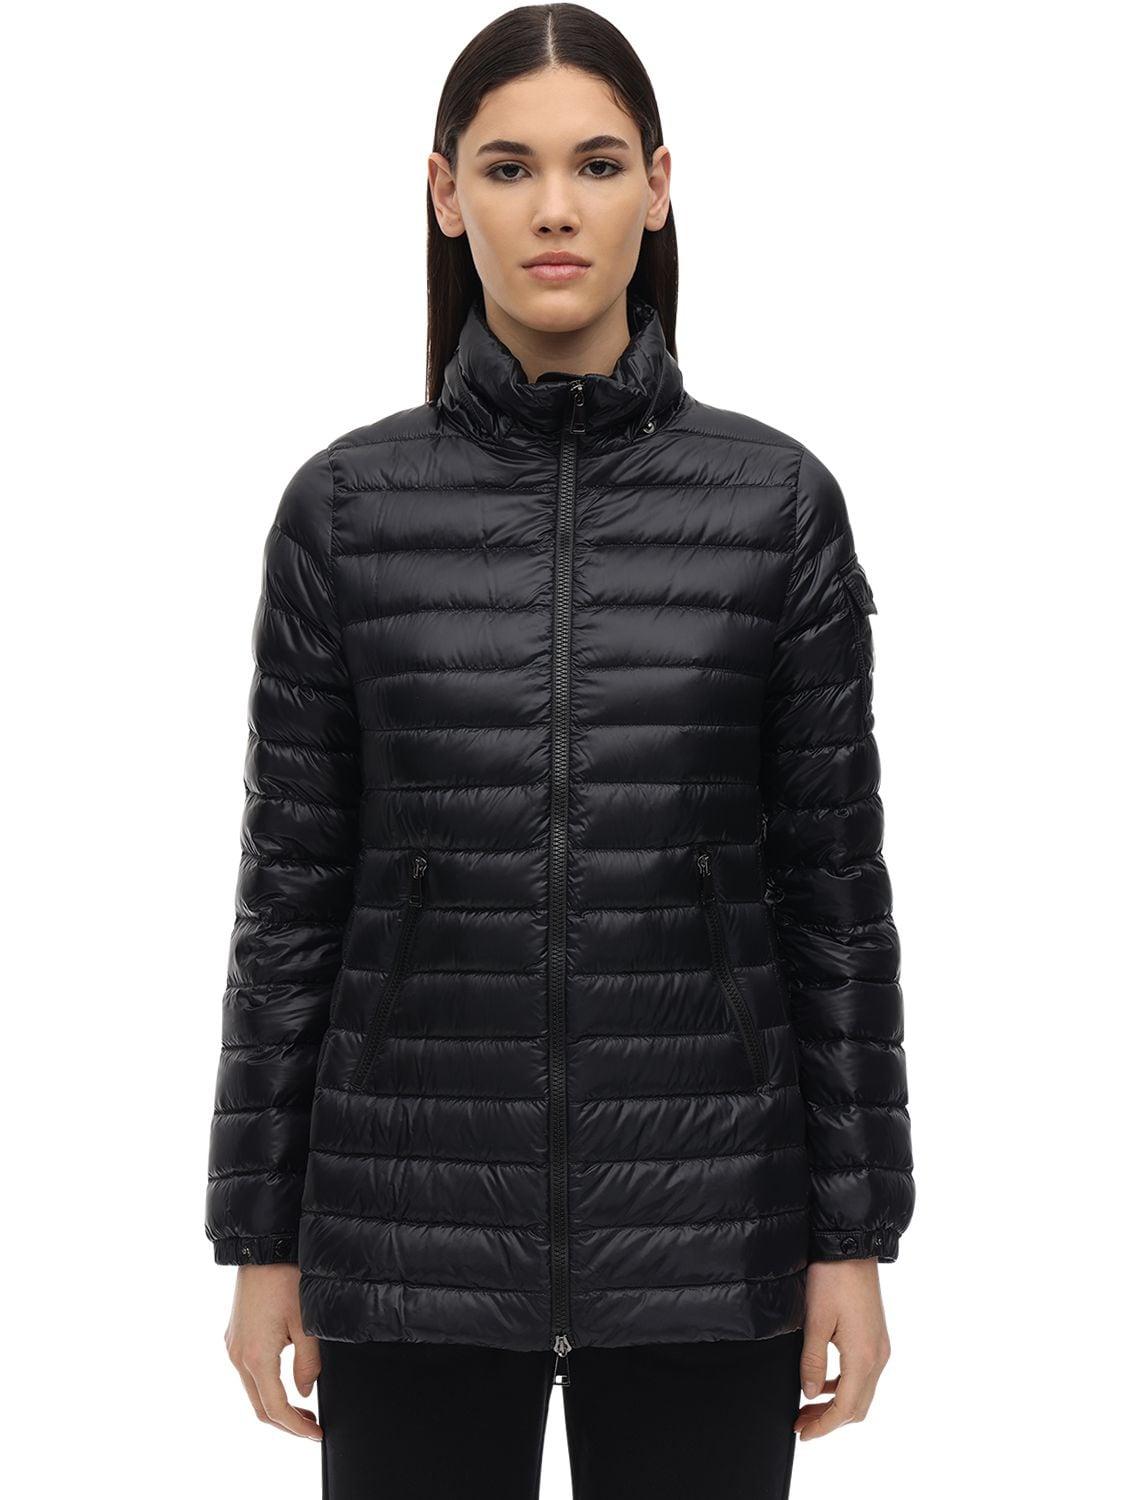 Moncler Synthetic Menthe Giubbotto Hooded Drawstring Puffer Coat in Black -  Save 43% - Lyst